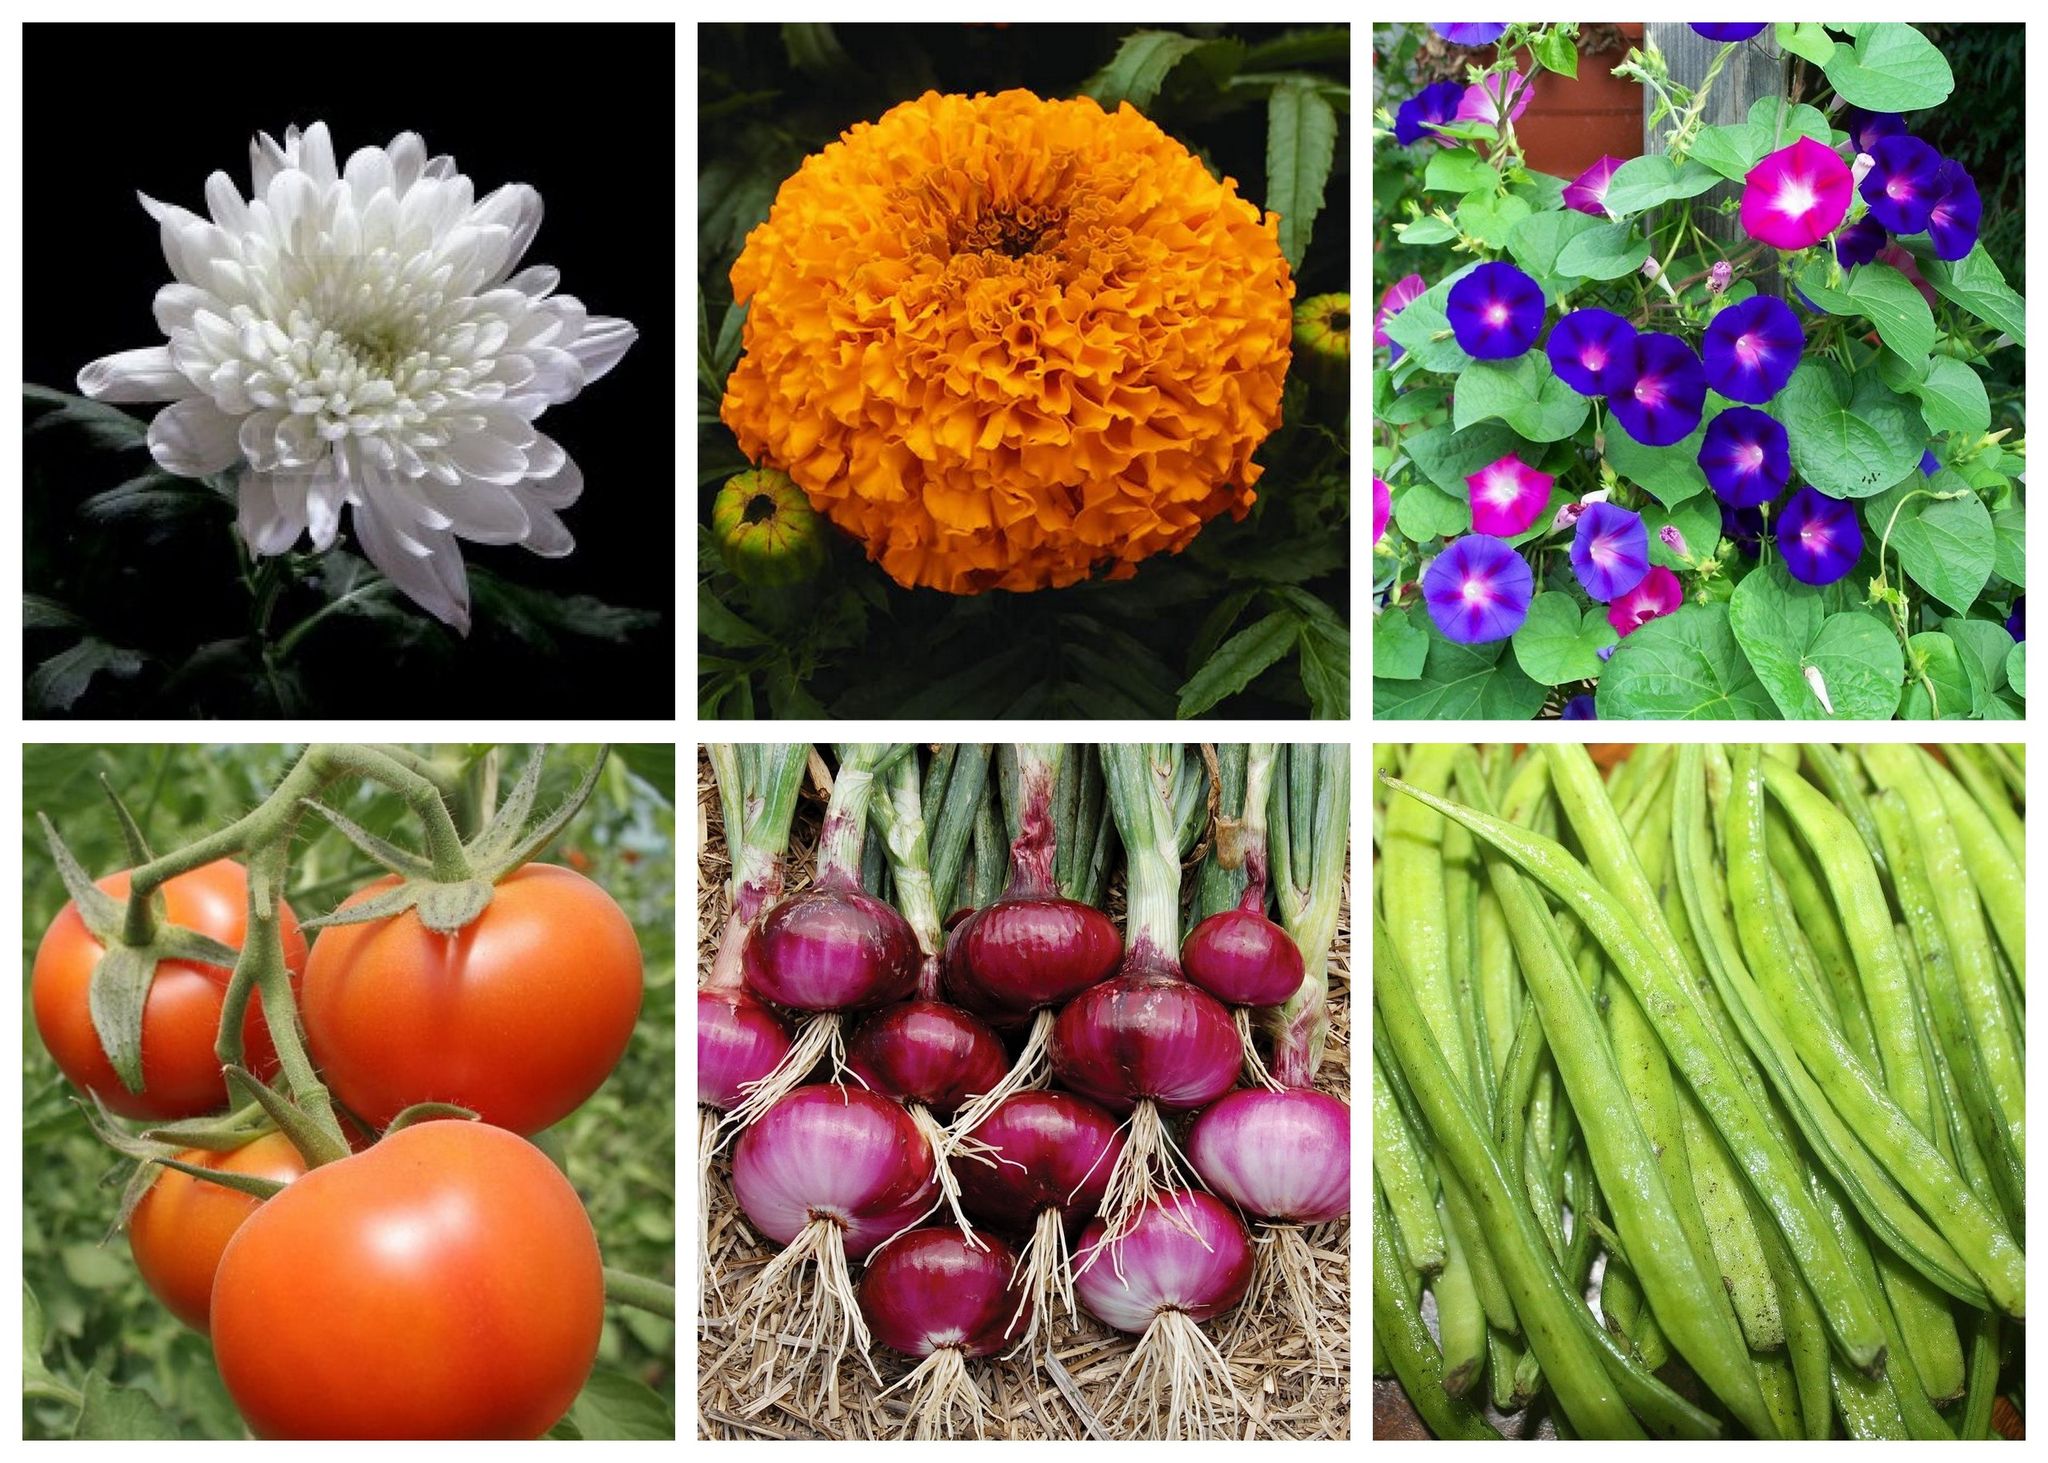 SimXotic Combo of Seeds – Chrysanthemum|Marigold|Morning Glory|Tomato|Onion Red|Cluster Beans F9.4